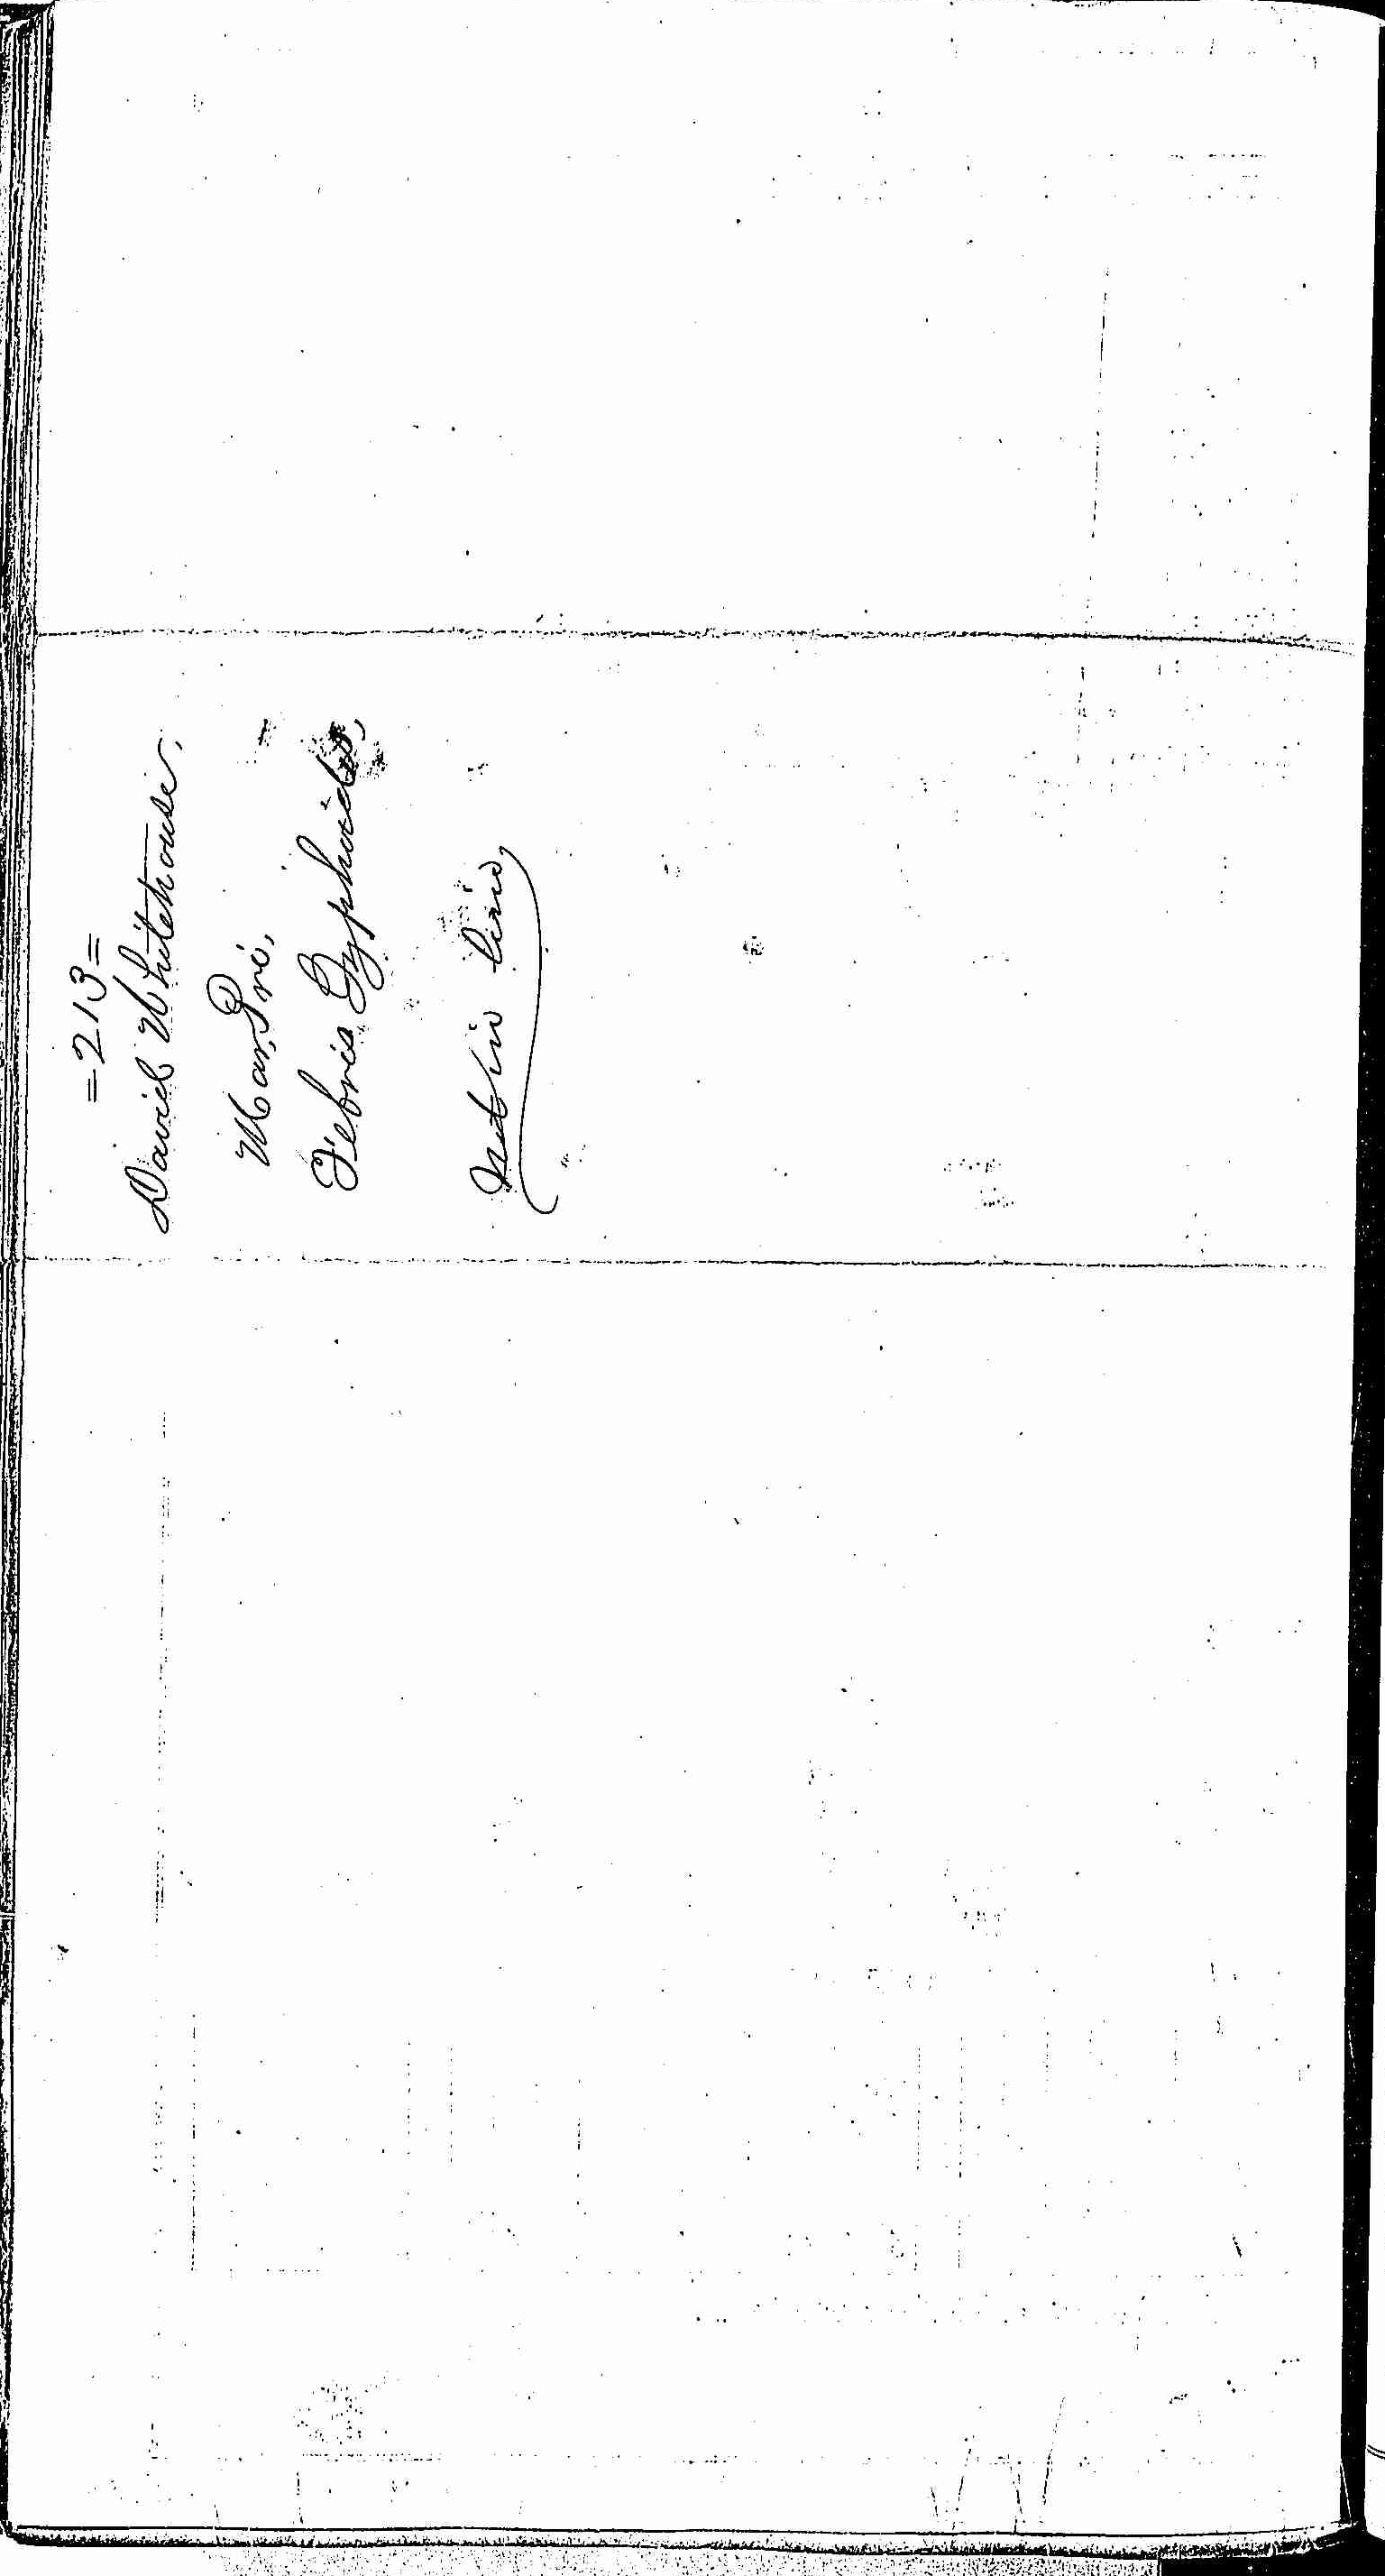 Entry for David Whitehouse (page 2 of 2) in the log Hospital Tickets and Case Papers - Naval Hospital - Washington, D.C. - 1866-68